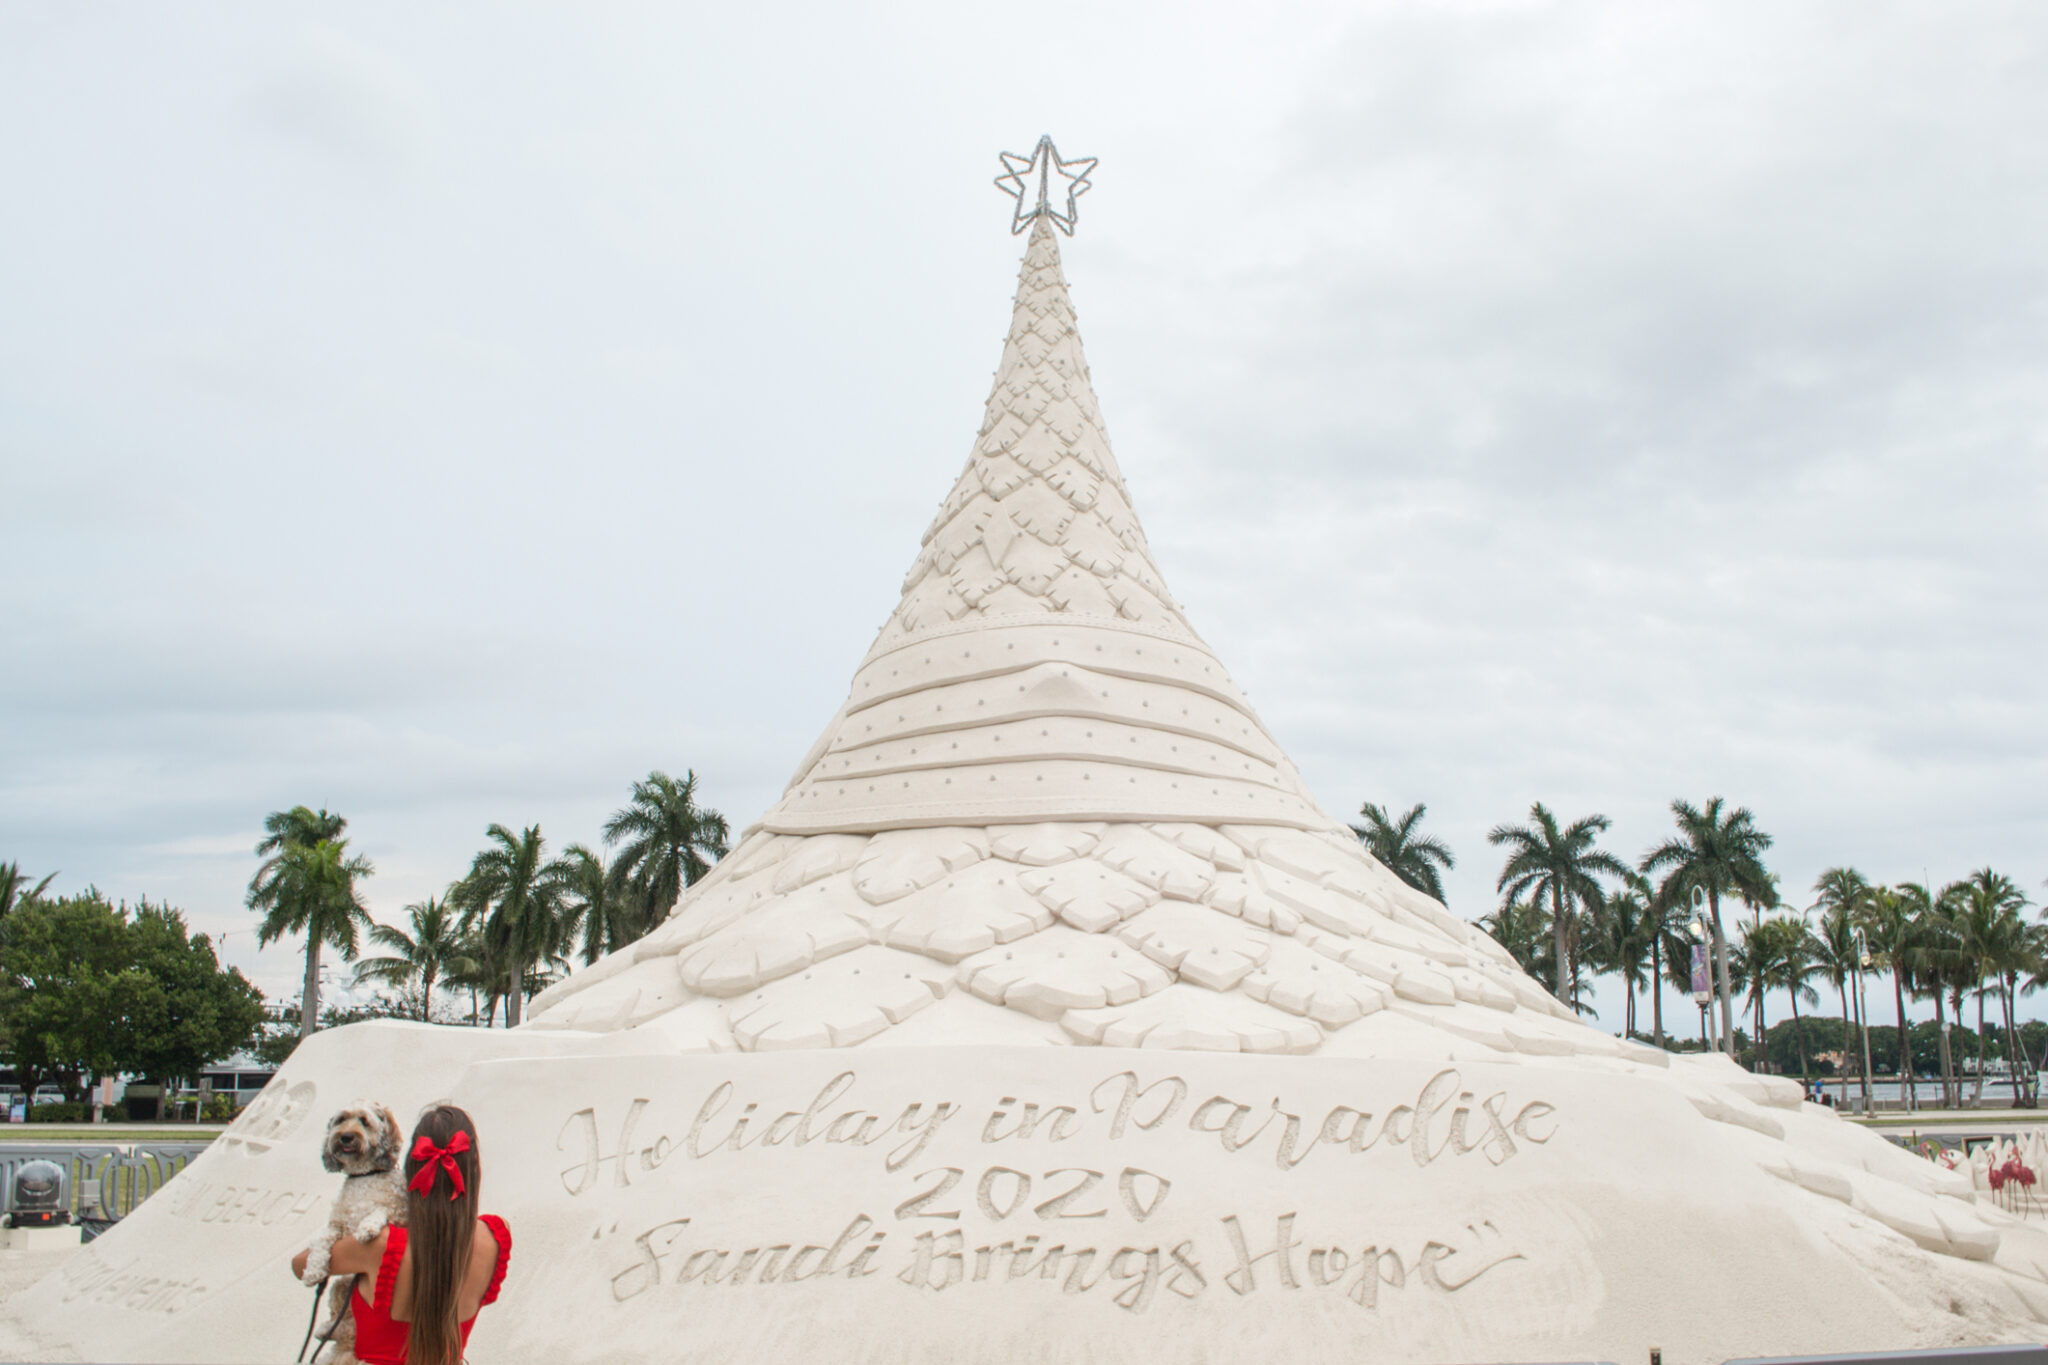 Holiday in Paradise sand tree in West Palm Beach, Florida. 